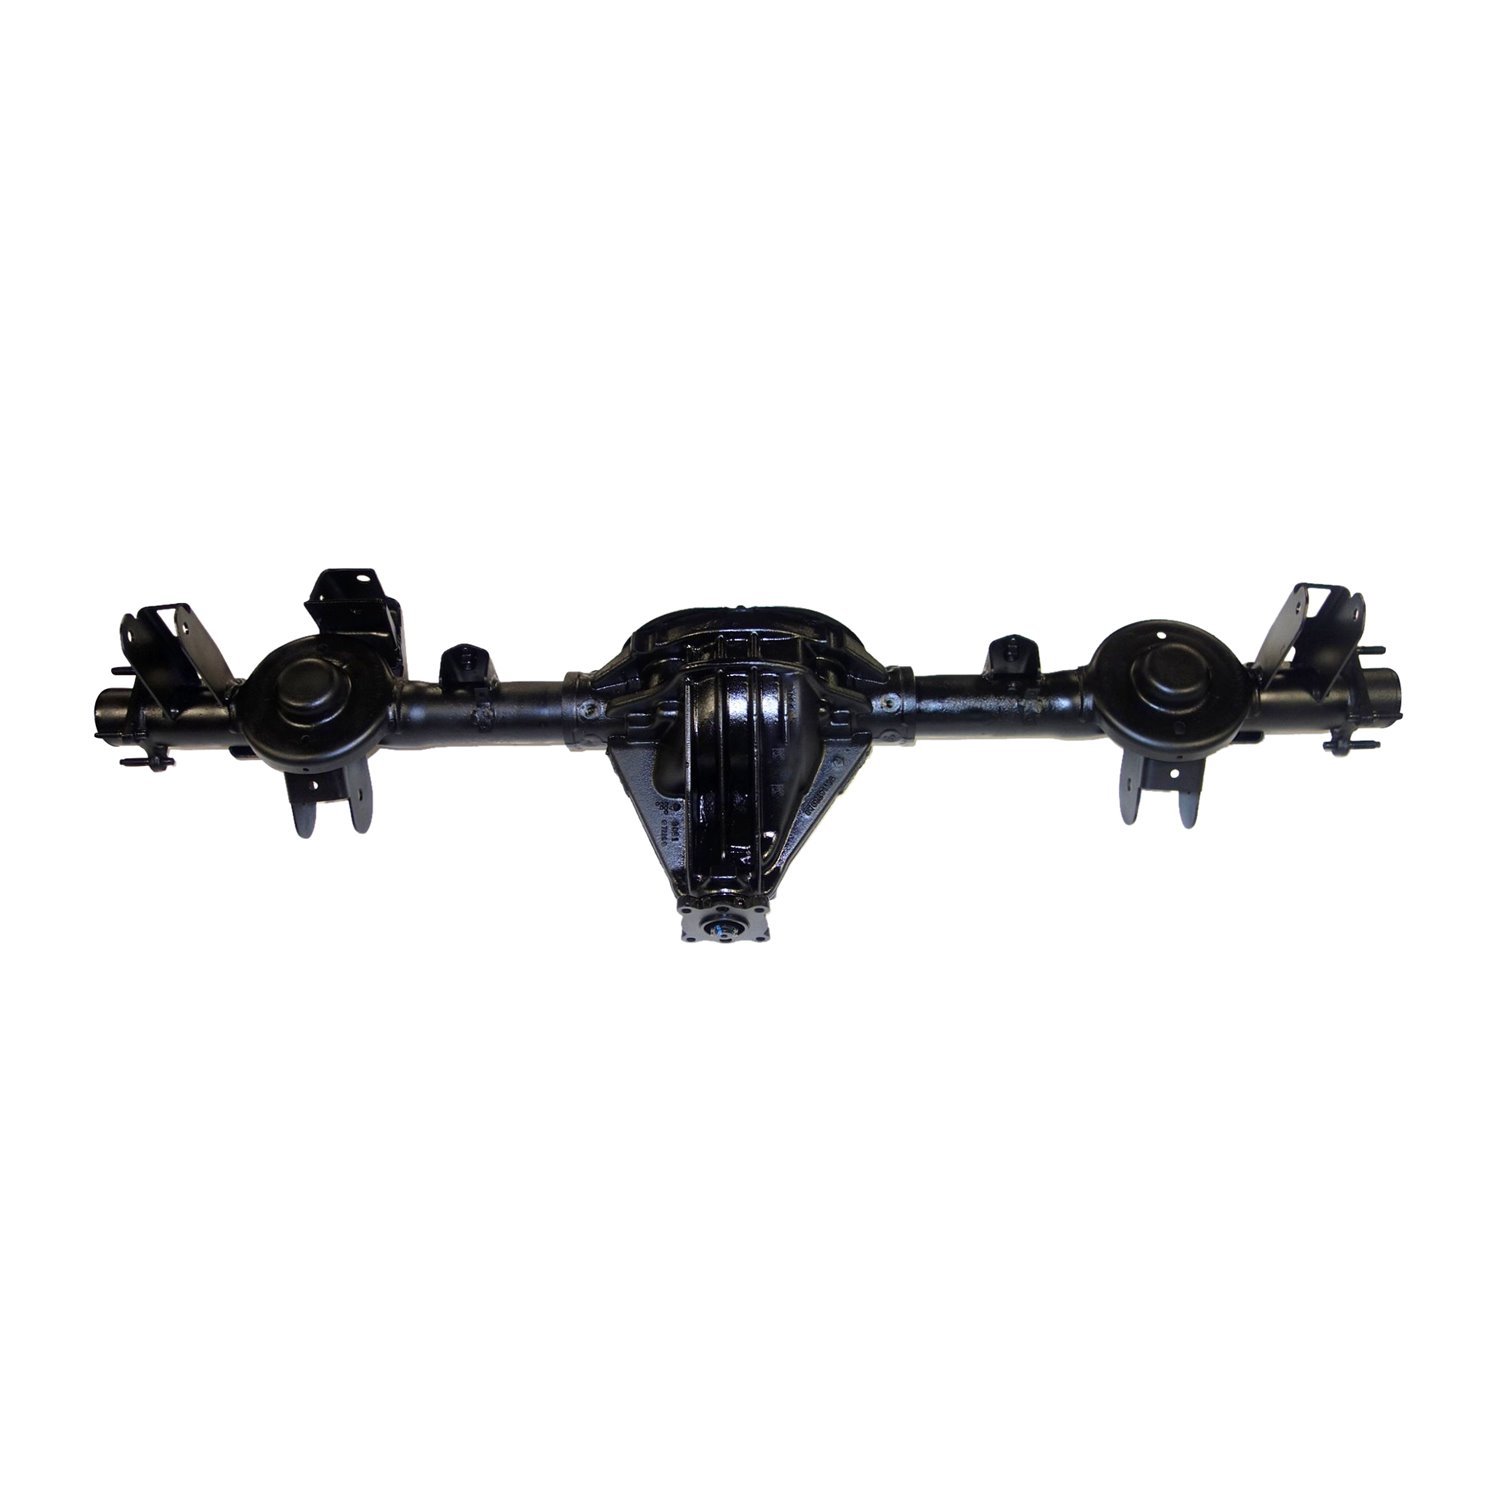 Remanufactured Complete Axle Assembly for Chy 8.25" 2005 Liberty 4.11 , 2.4l with ABS